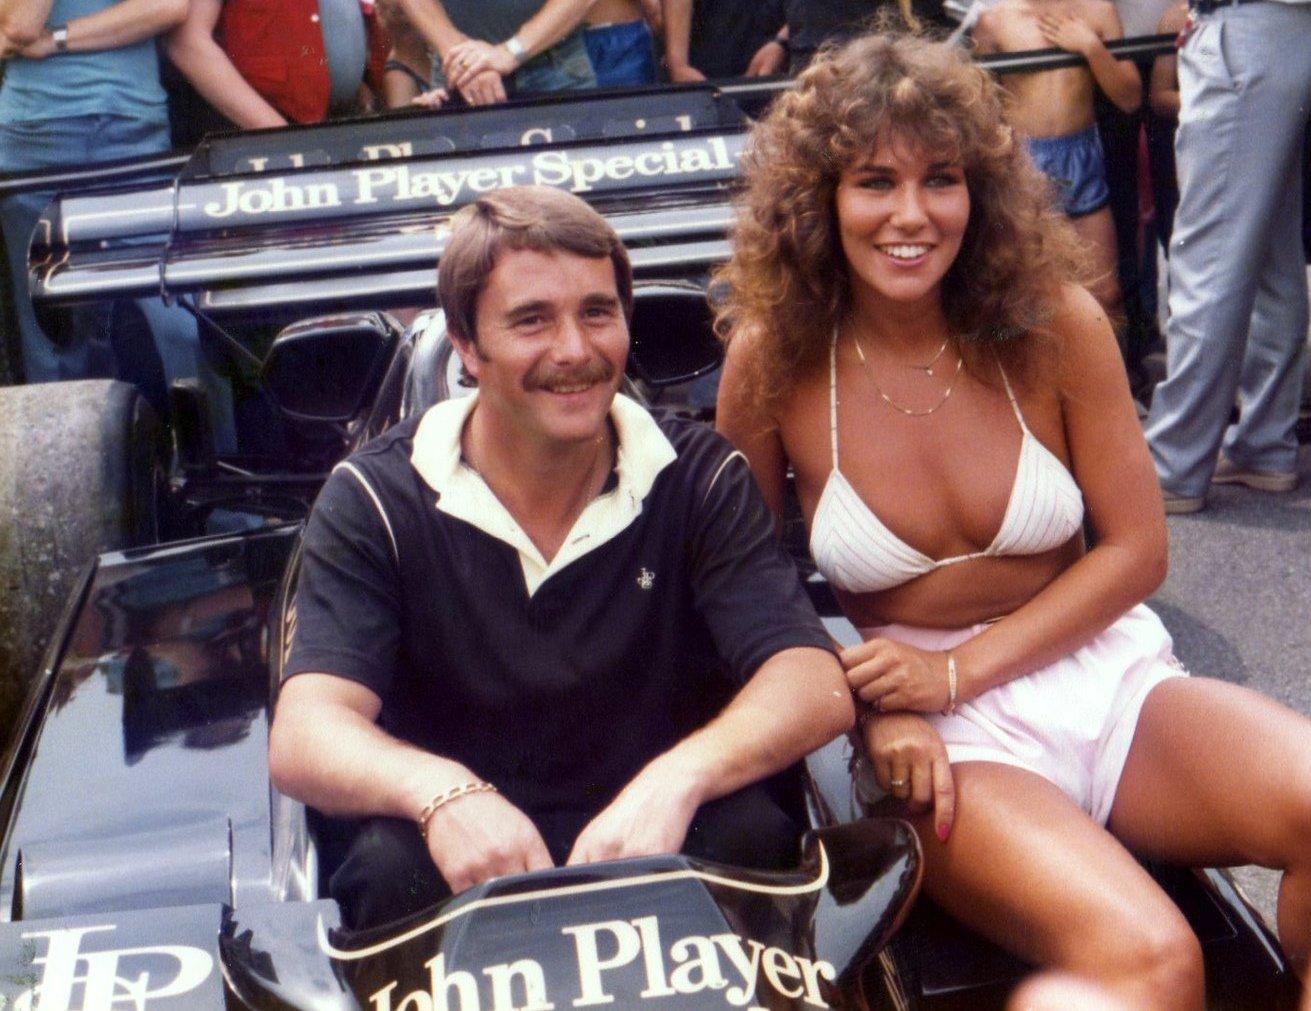 The Sun Free Race Day at Brands Hatch, UK, on Sunday 31st July 1983. Attending was Lotus F1 driver Nigel Mansell and the Sun's Page 3 model Linda Lusardi.